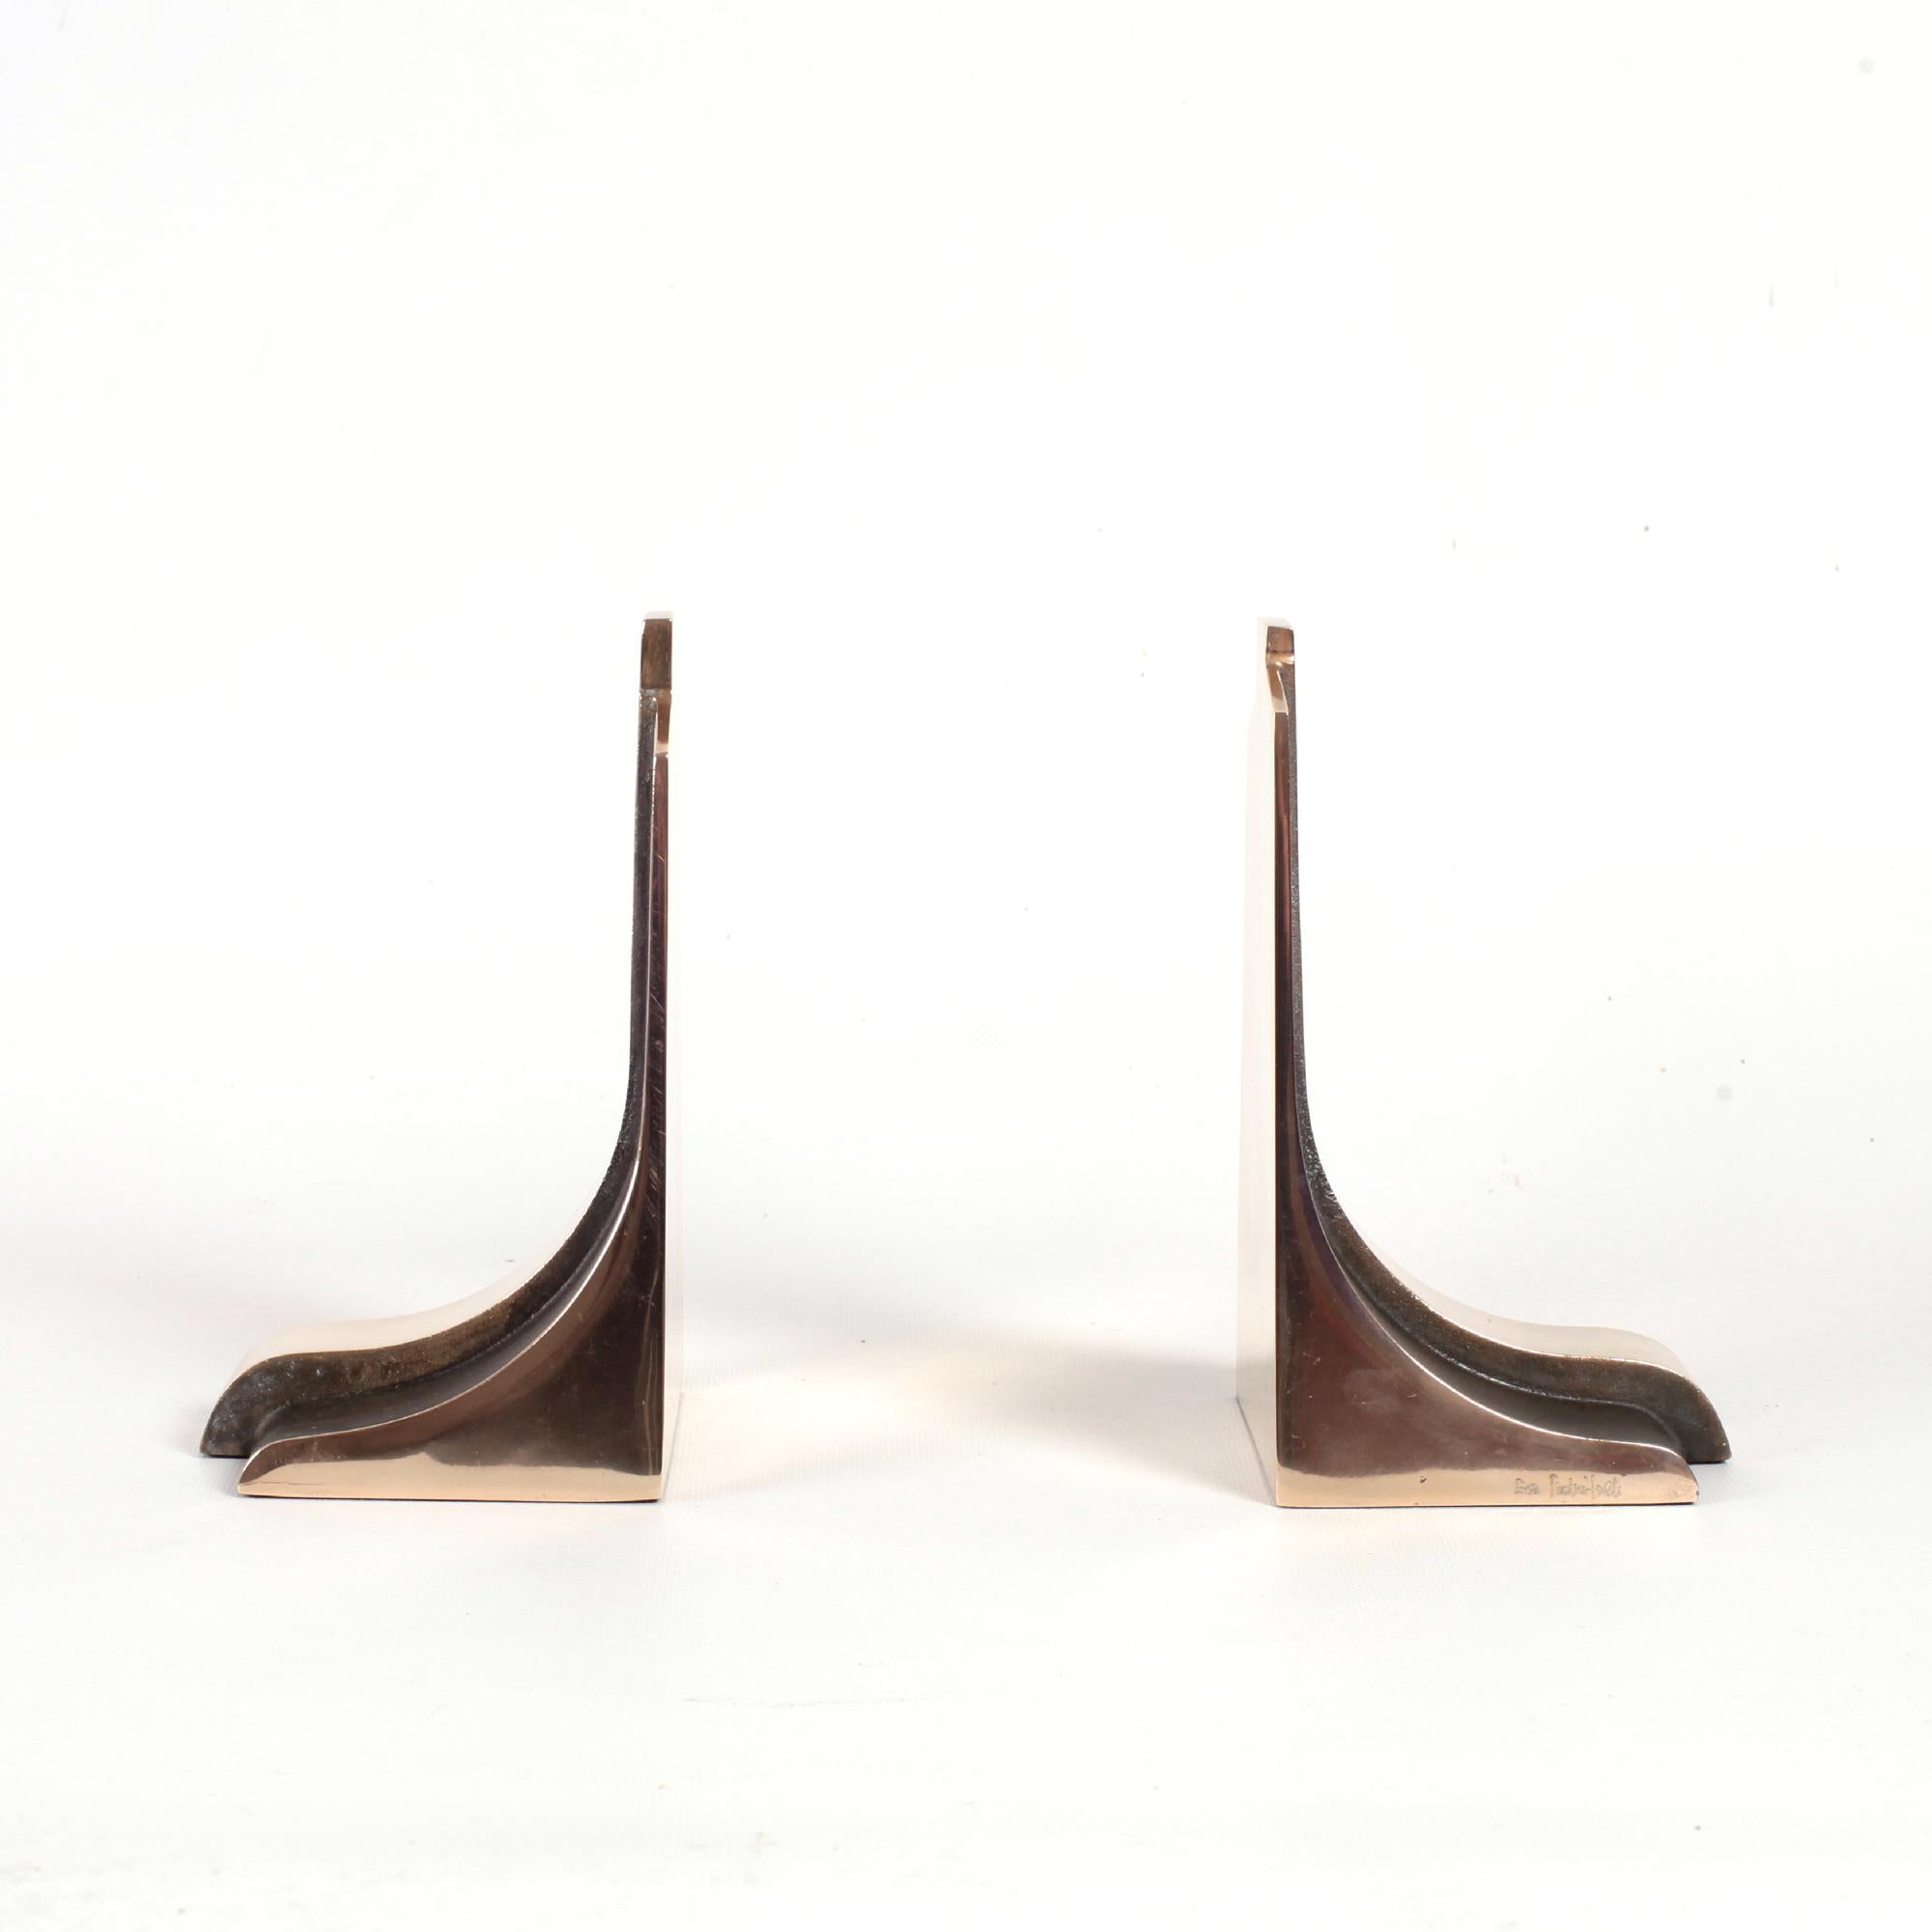 Sculptural pair of bronze bookend designed by Esa Fedrigolli for Esart Italy.
Heavy cast bronze with felt bottoms.
Signed by the artist and original Manufacturer's label to underside 